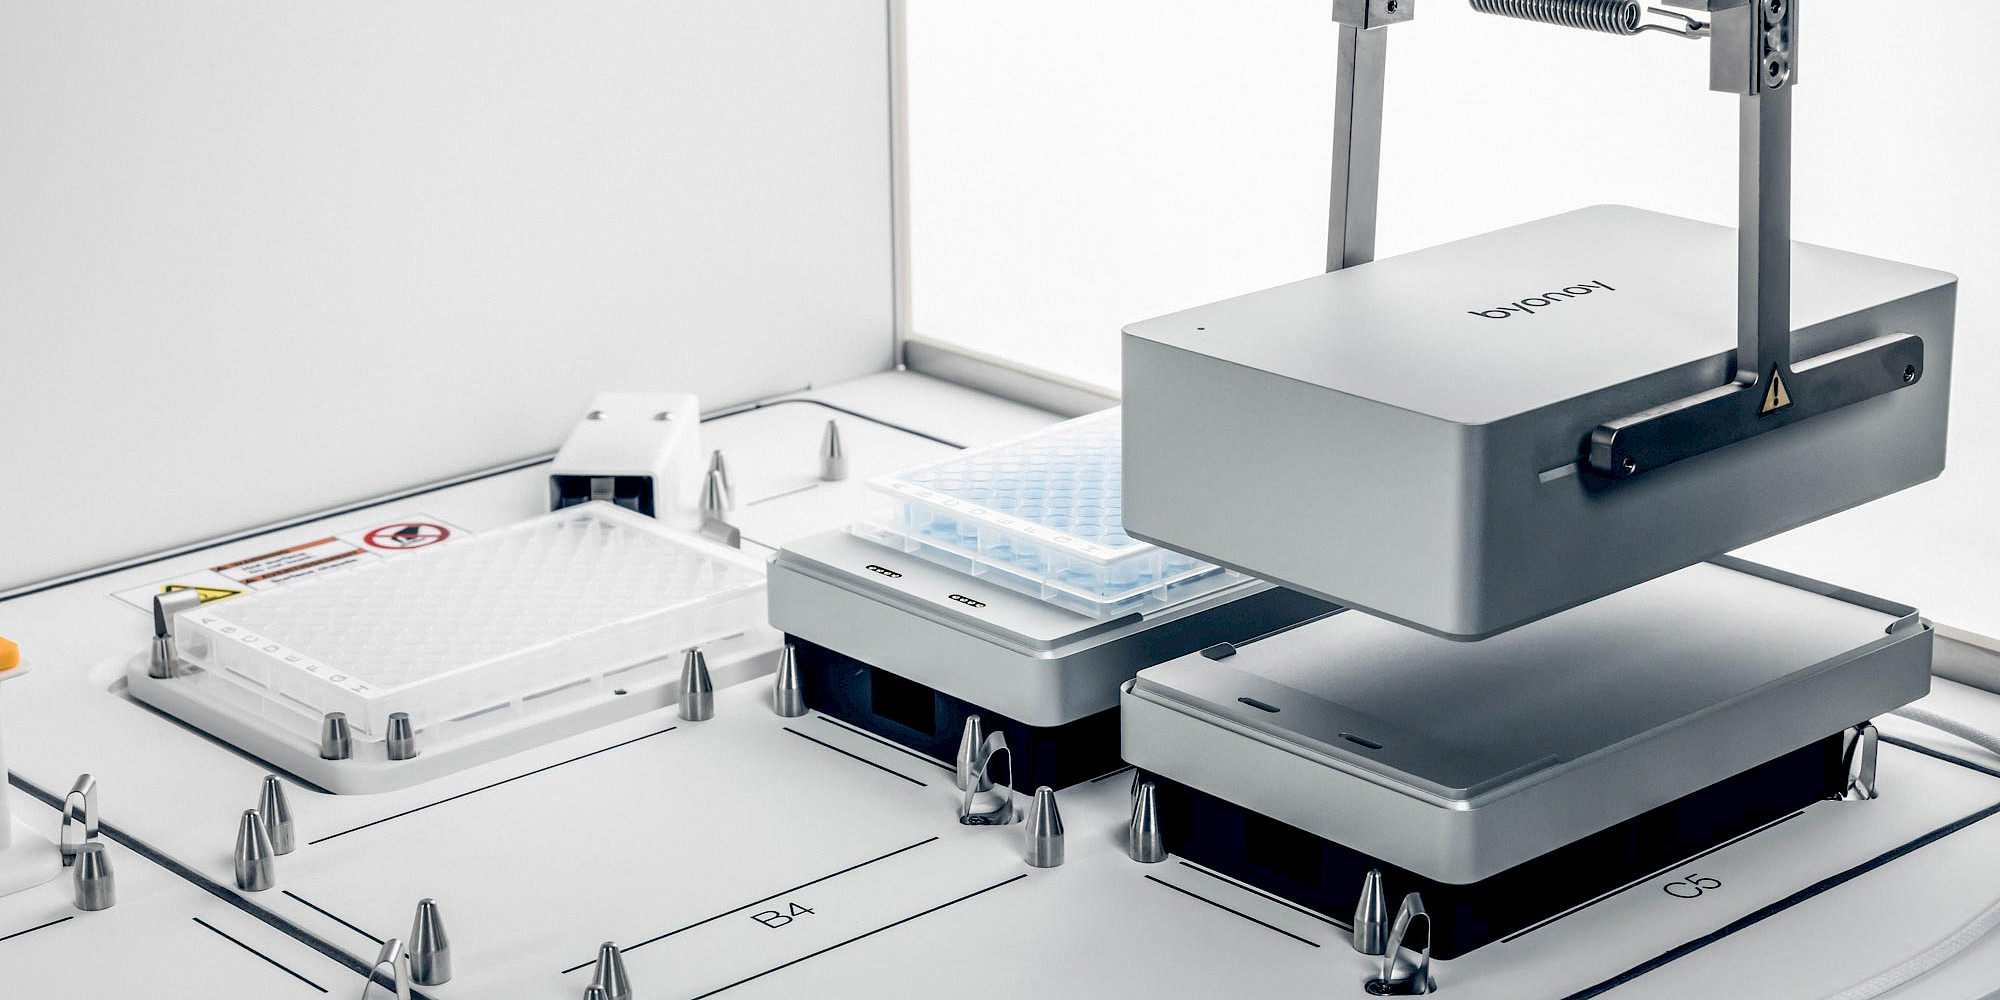  Lab Automation with integrated detection method unleashes new applications News Byonoy